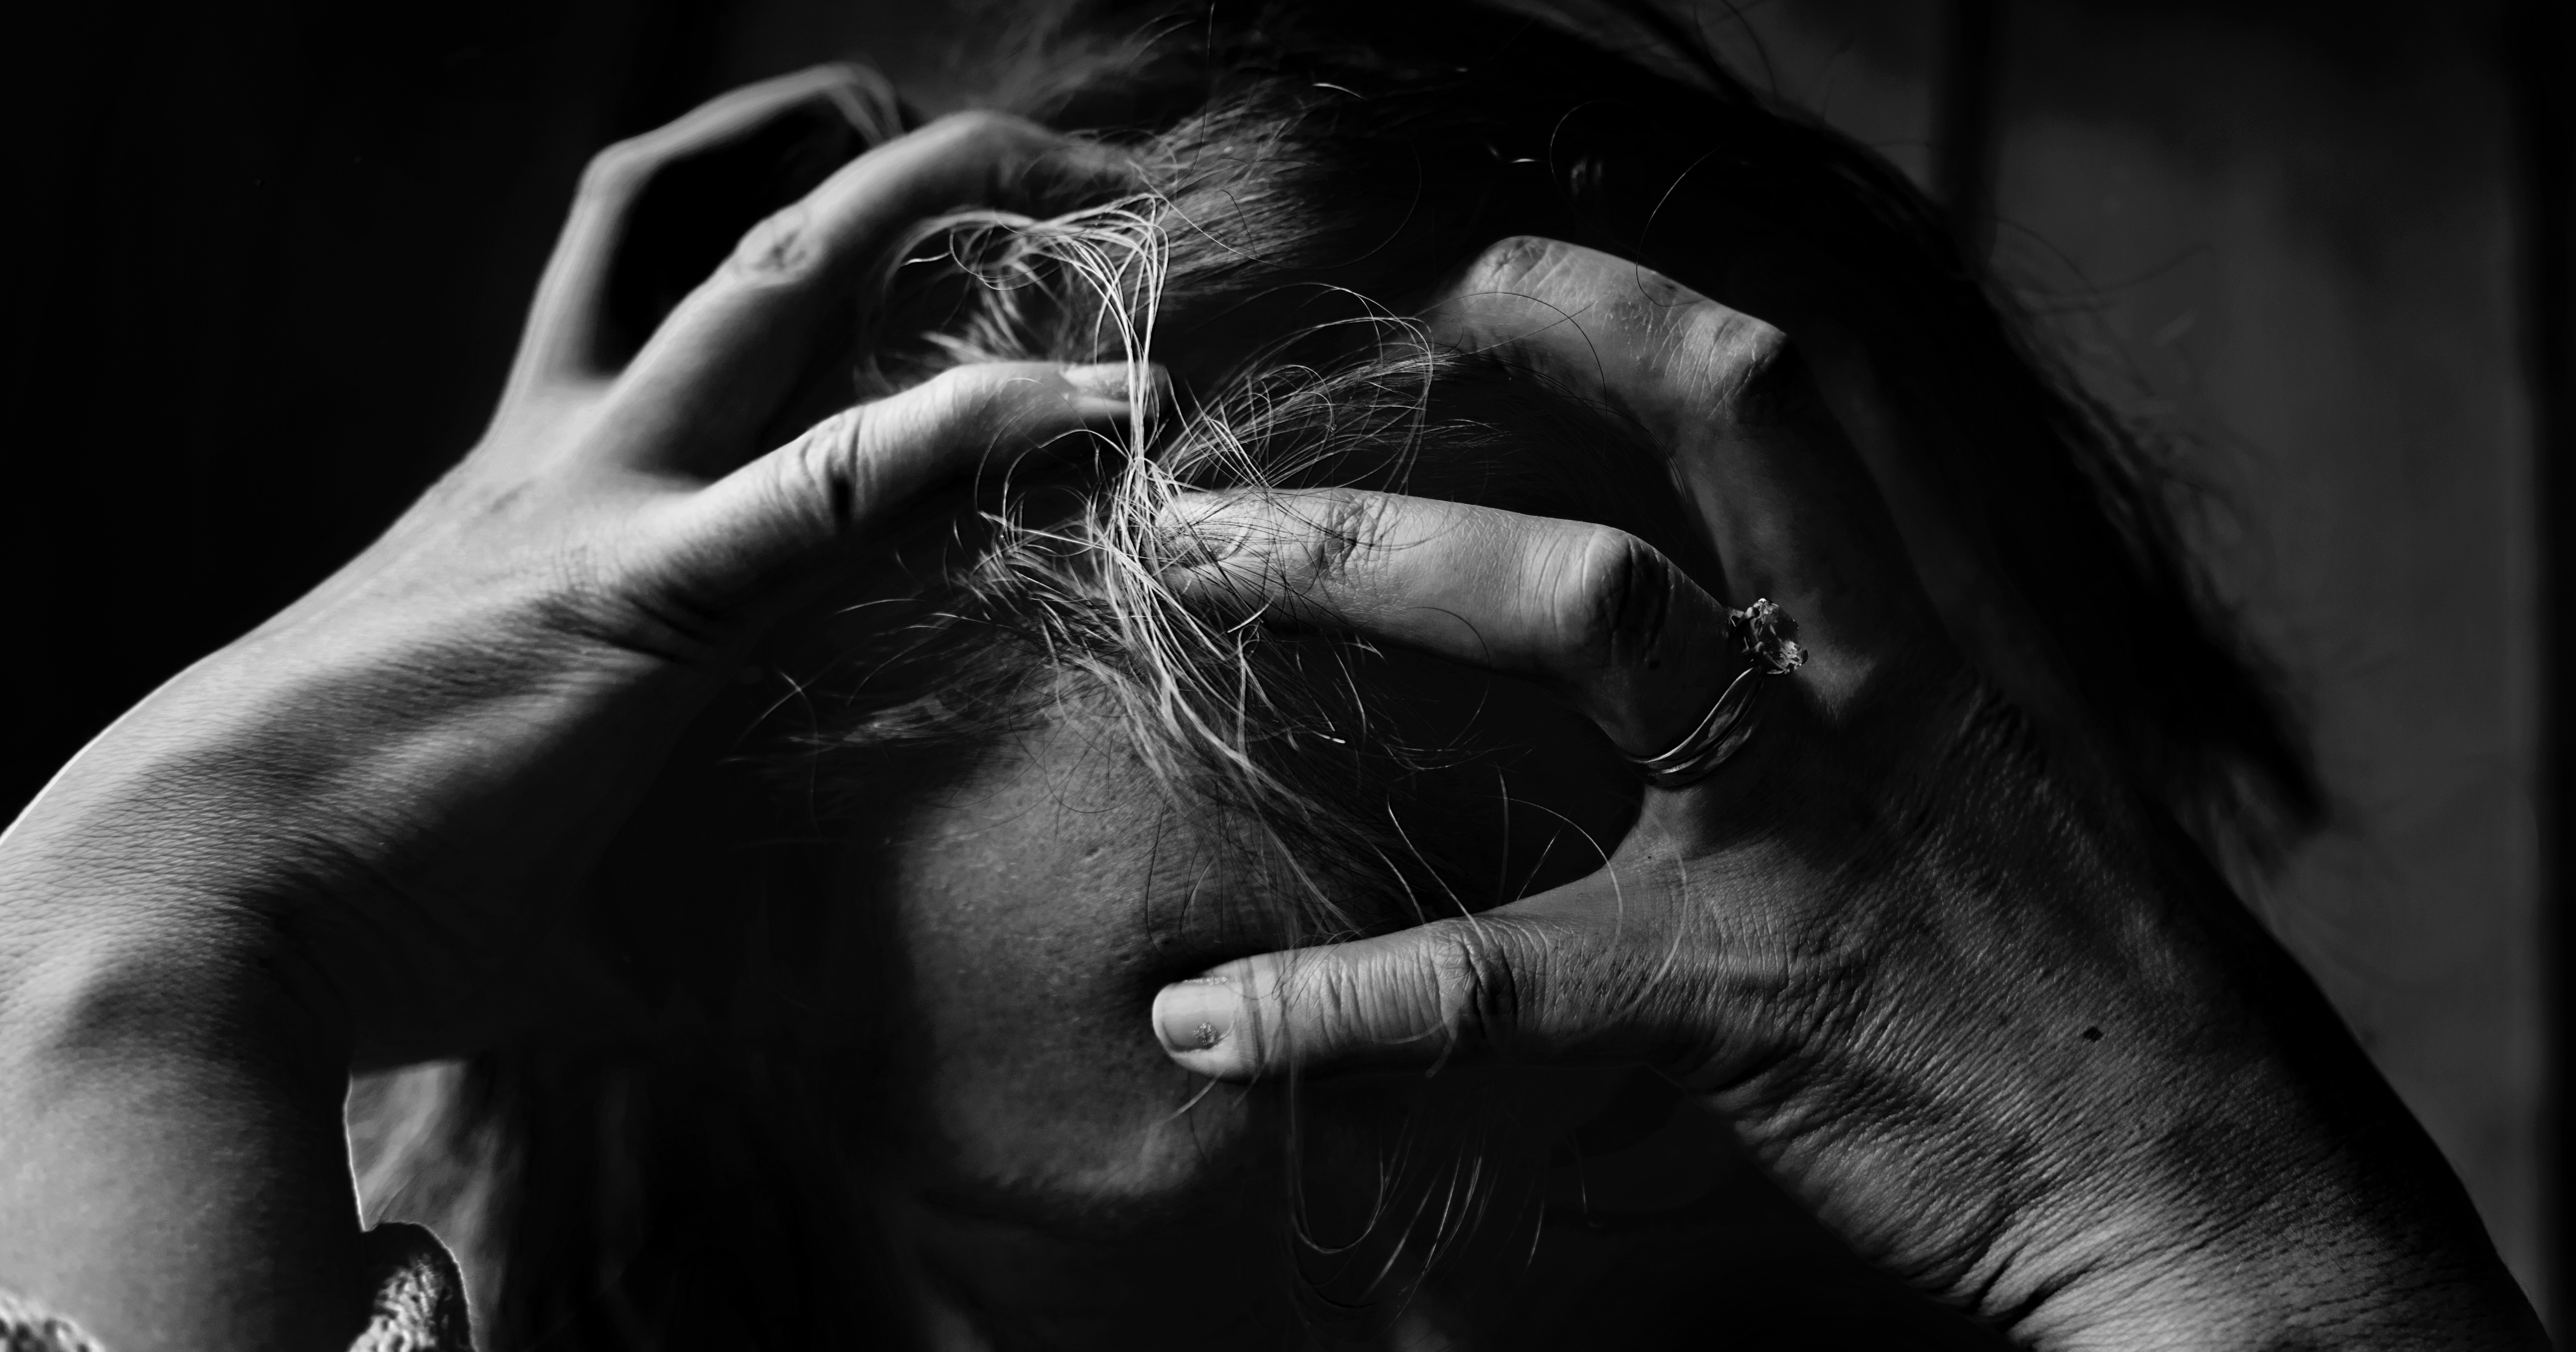 Image of a stressed person. The Australian report detailed the horror of conversion therapy.